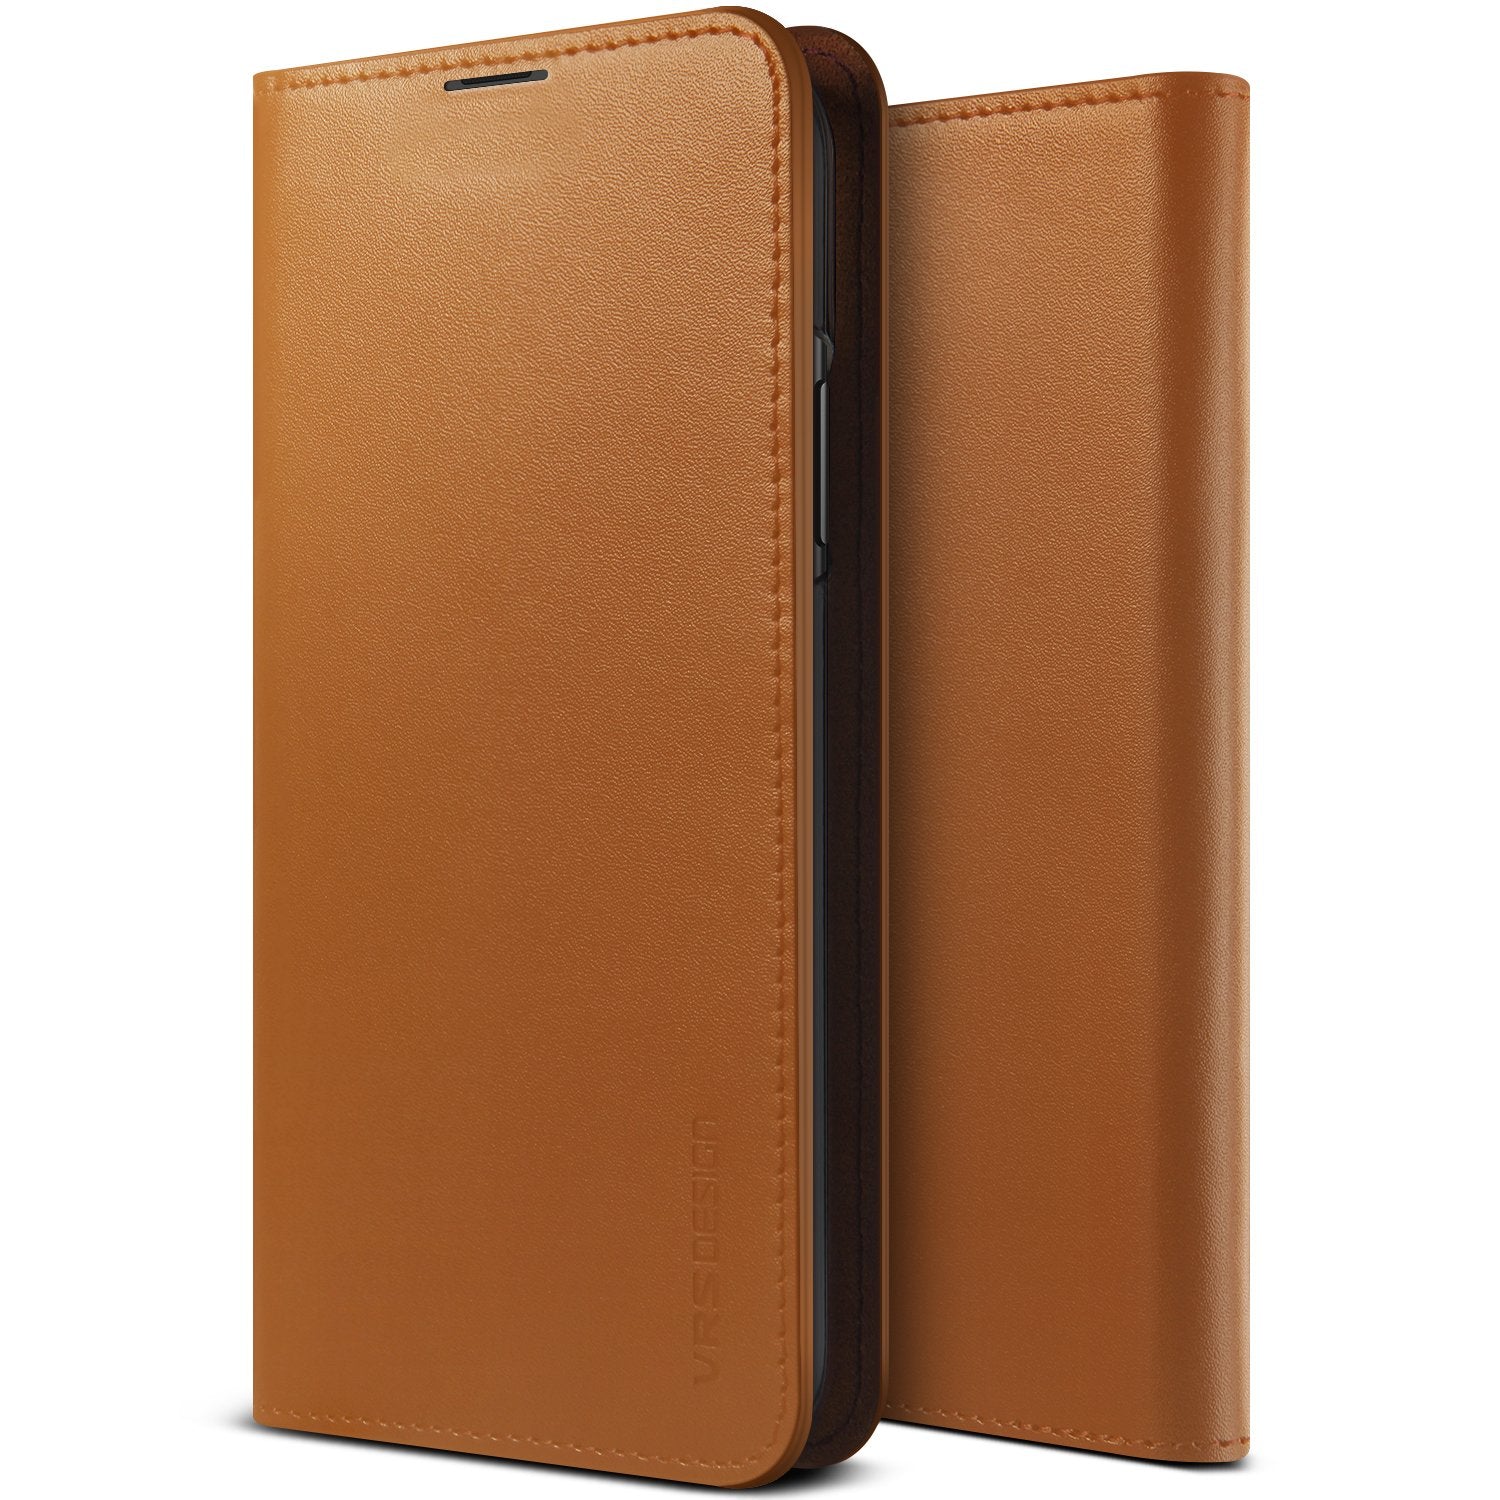  YoodQood for Samsung Galaxy Note10 Plus Square Case Non Slip  Shockproof Slim TPU Full Protection Retro Elegant Luxury Leather Case with  Kickstand for Samsung Note 10 Plus(Brown) : Cell Phones 